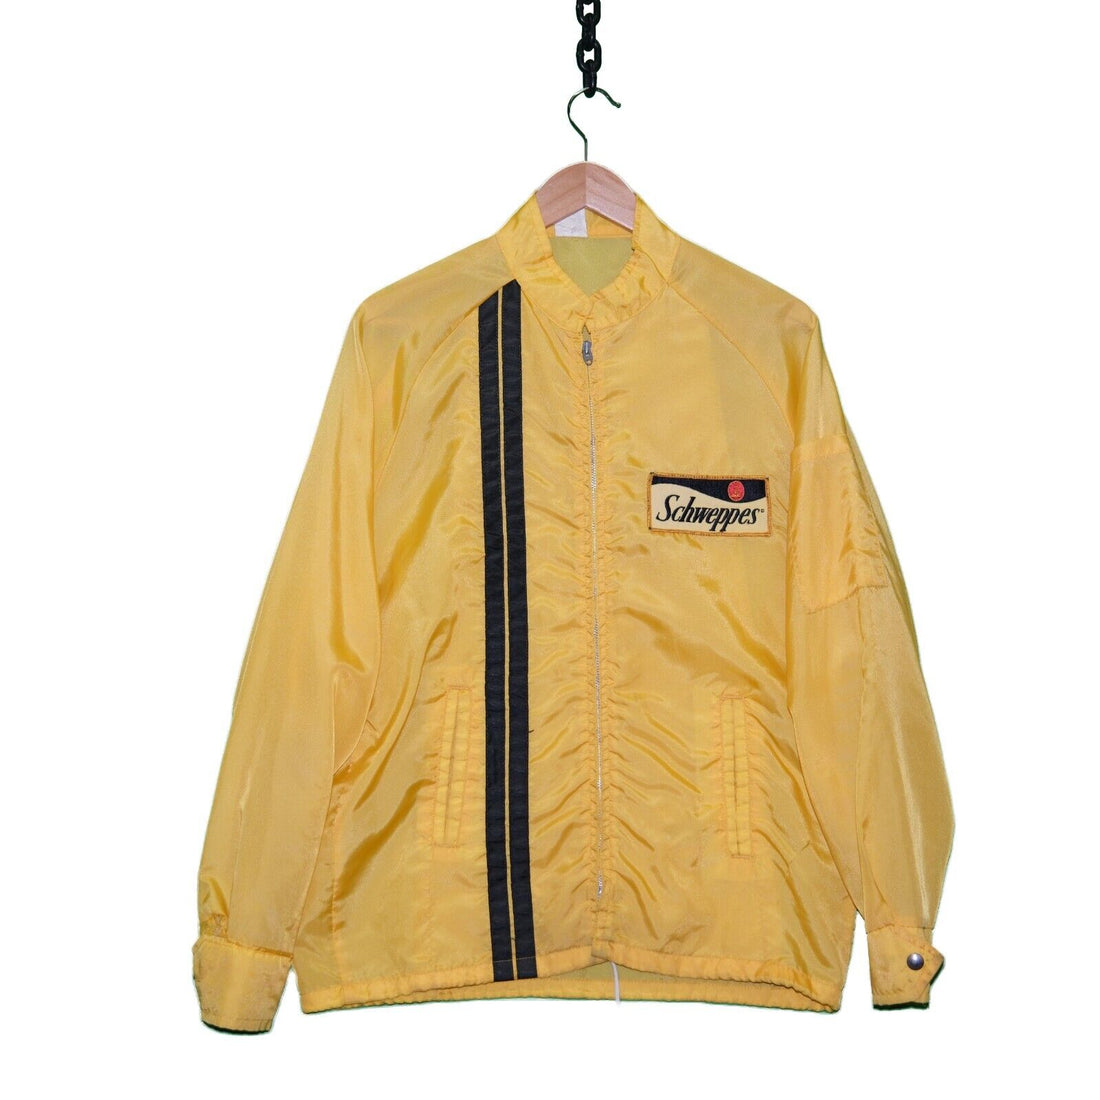 Vintage Schweppes Pit Crew Racing Jacket Size Large Yellow Lightning Zip 70s 80s